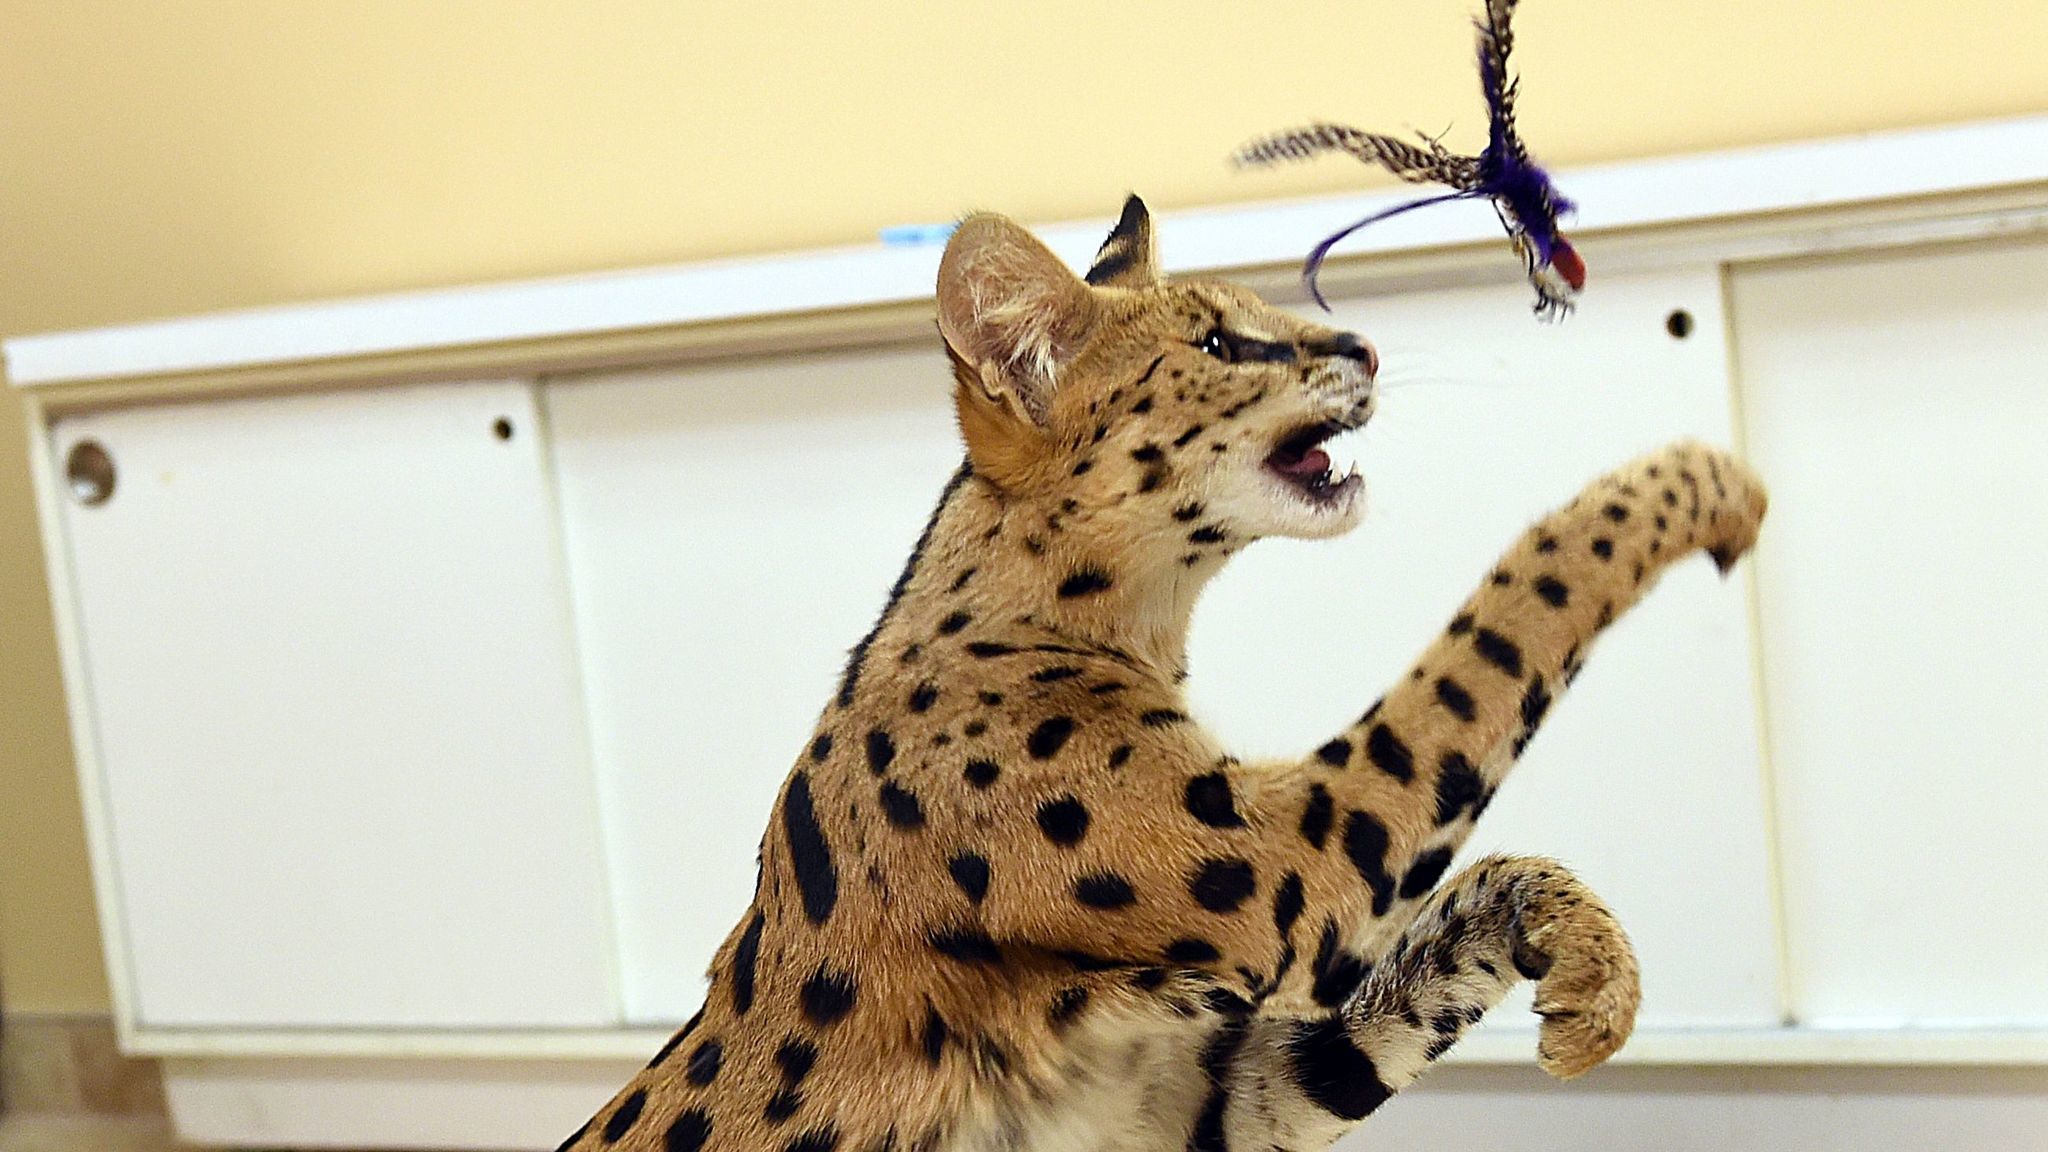 The African Serval cat was transported to a big cat rescue facility that can give it the special diet and extensive exercise it needs.  ( )